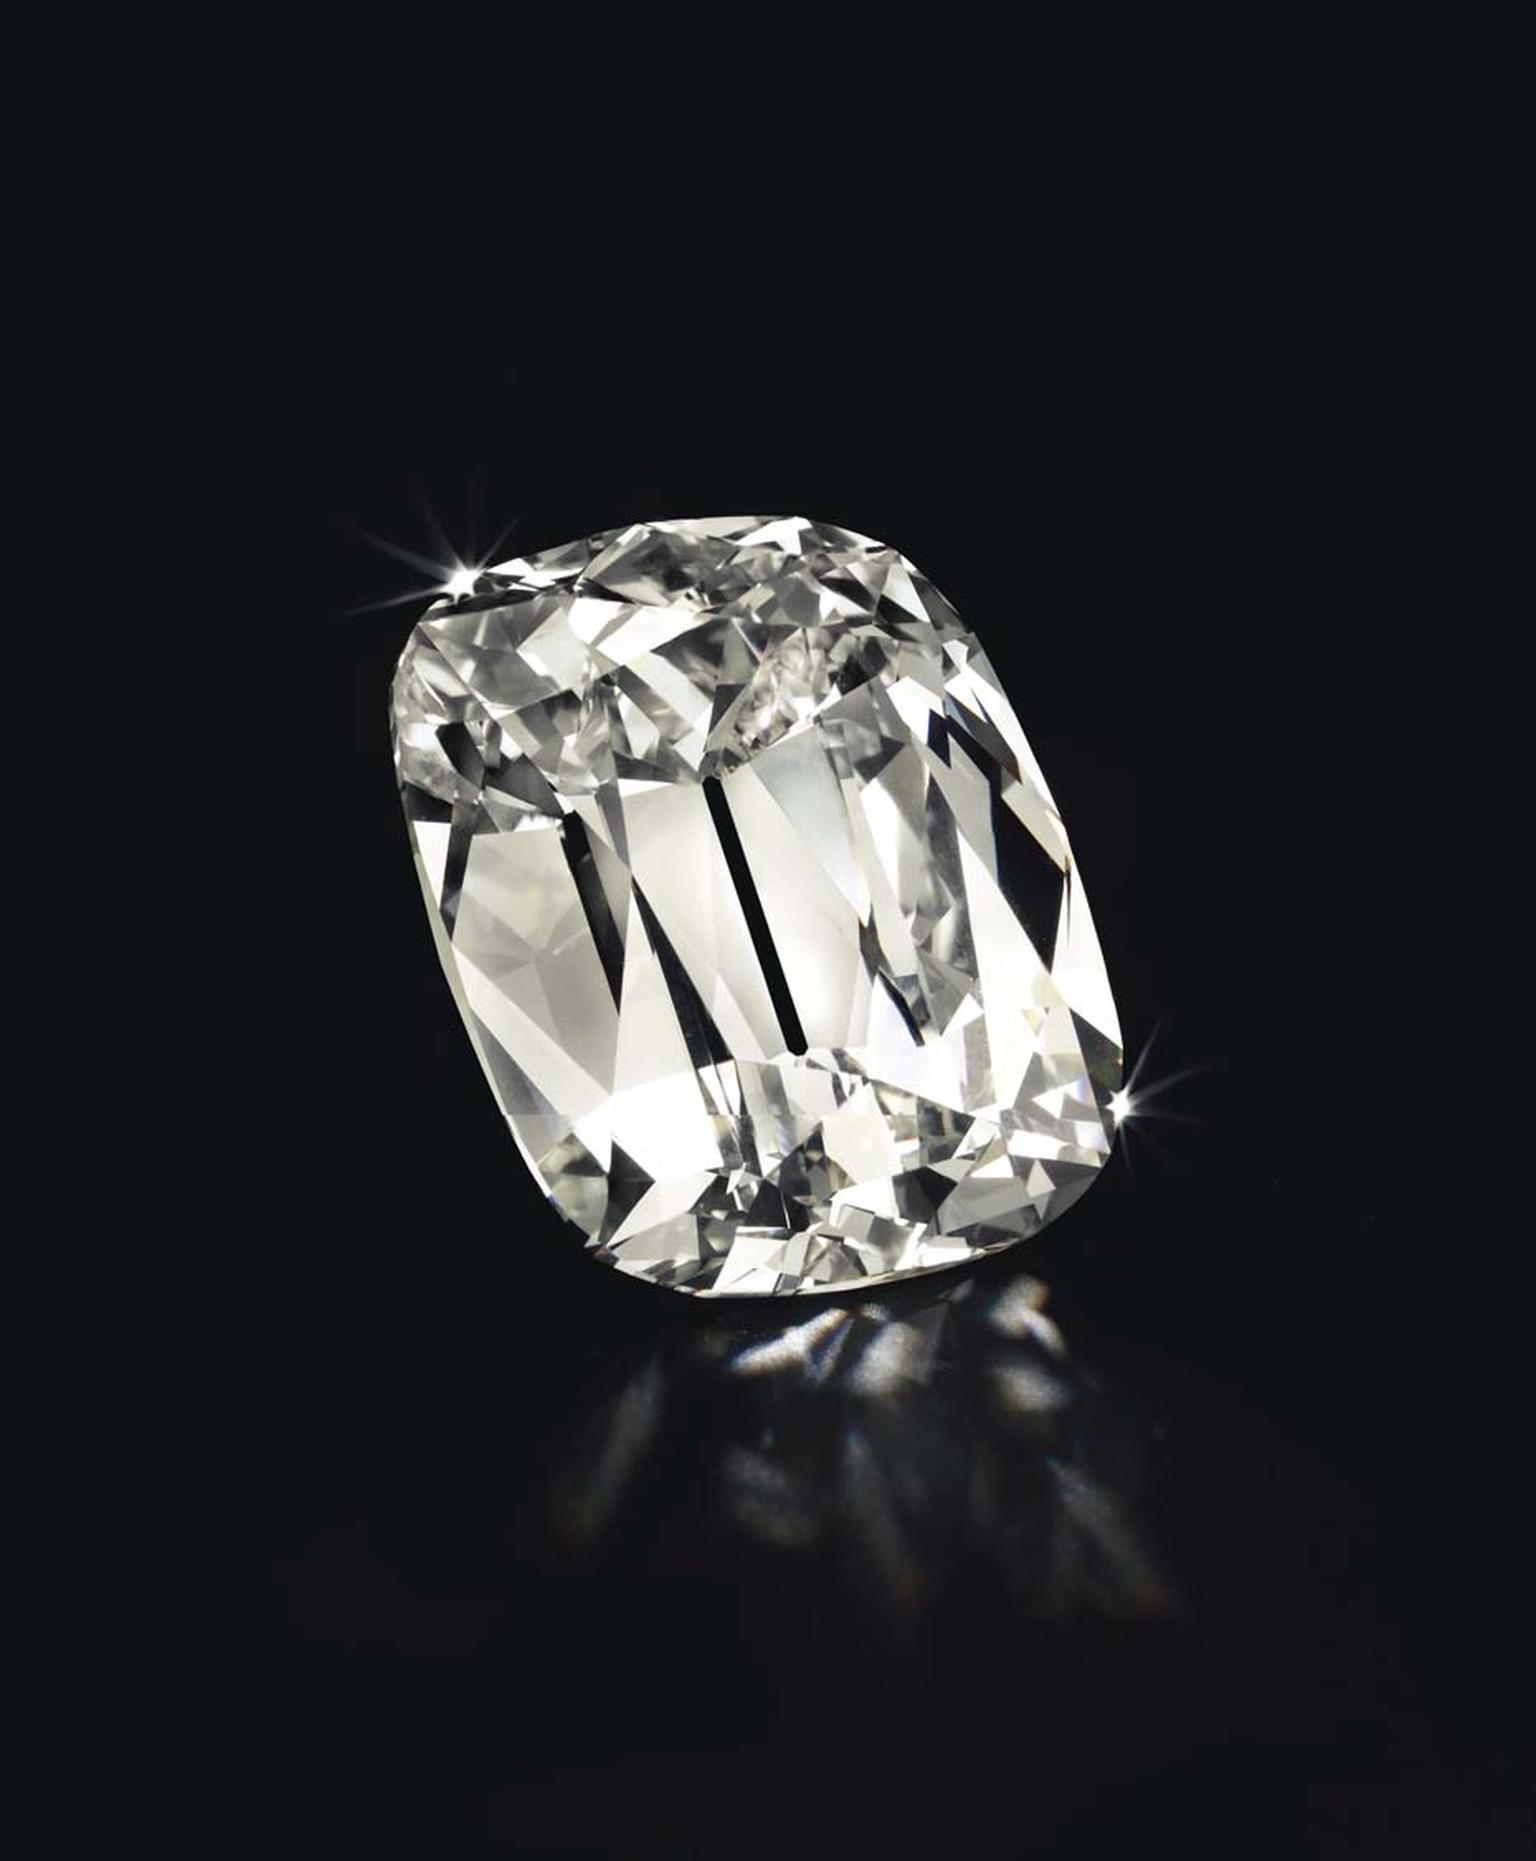 Christie's New York cushion-cut L colour VS2 diamond weighing 101.36ct sold for $4,981,000.